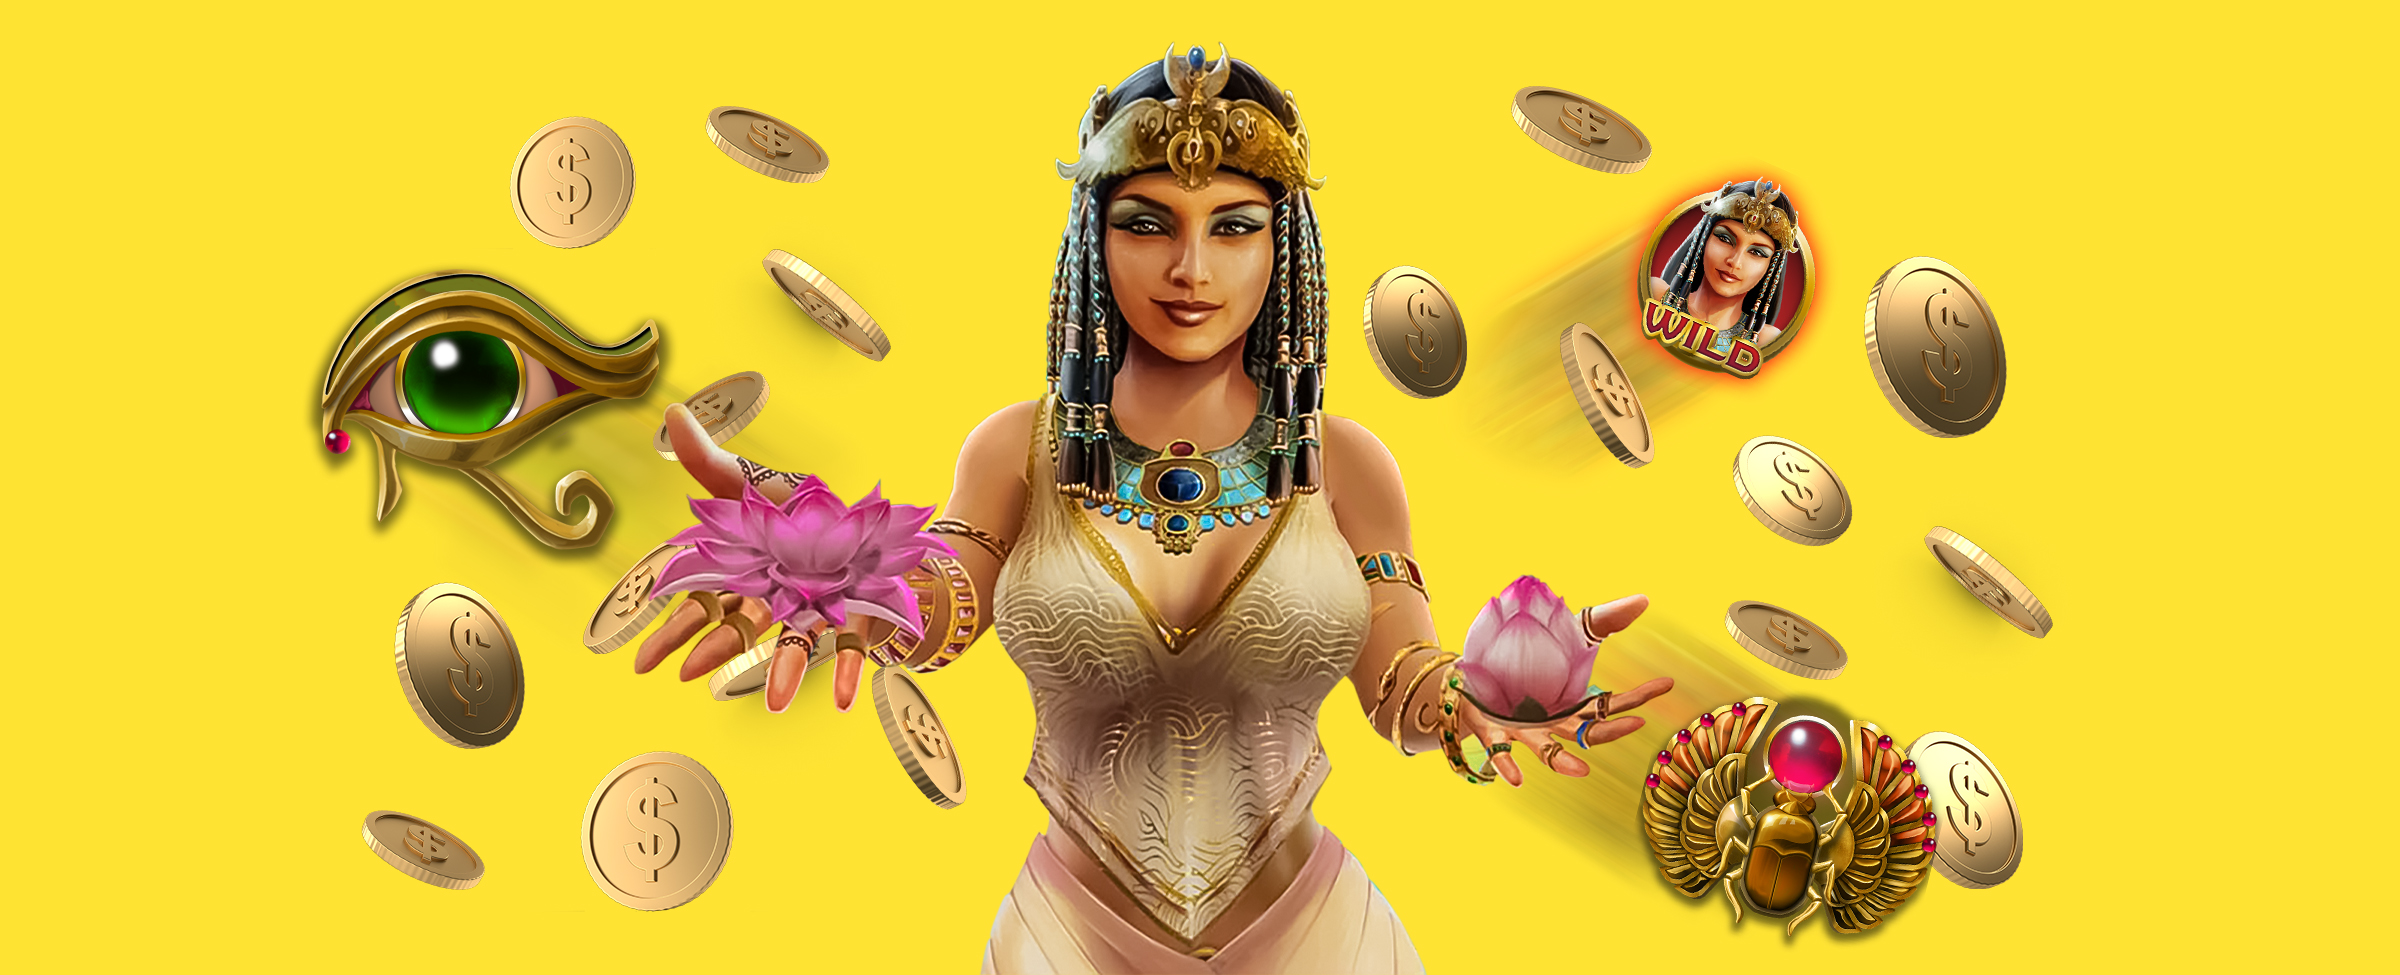 Cleopatra – the 3D-animated character from the Cafe Casino slot game, A Night With Cleo – is featured in the center of a yellow background, surrounded by lucky symbols and gold coins.